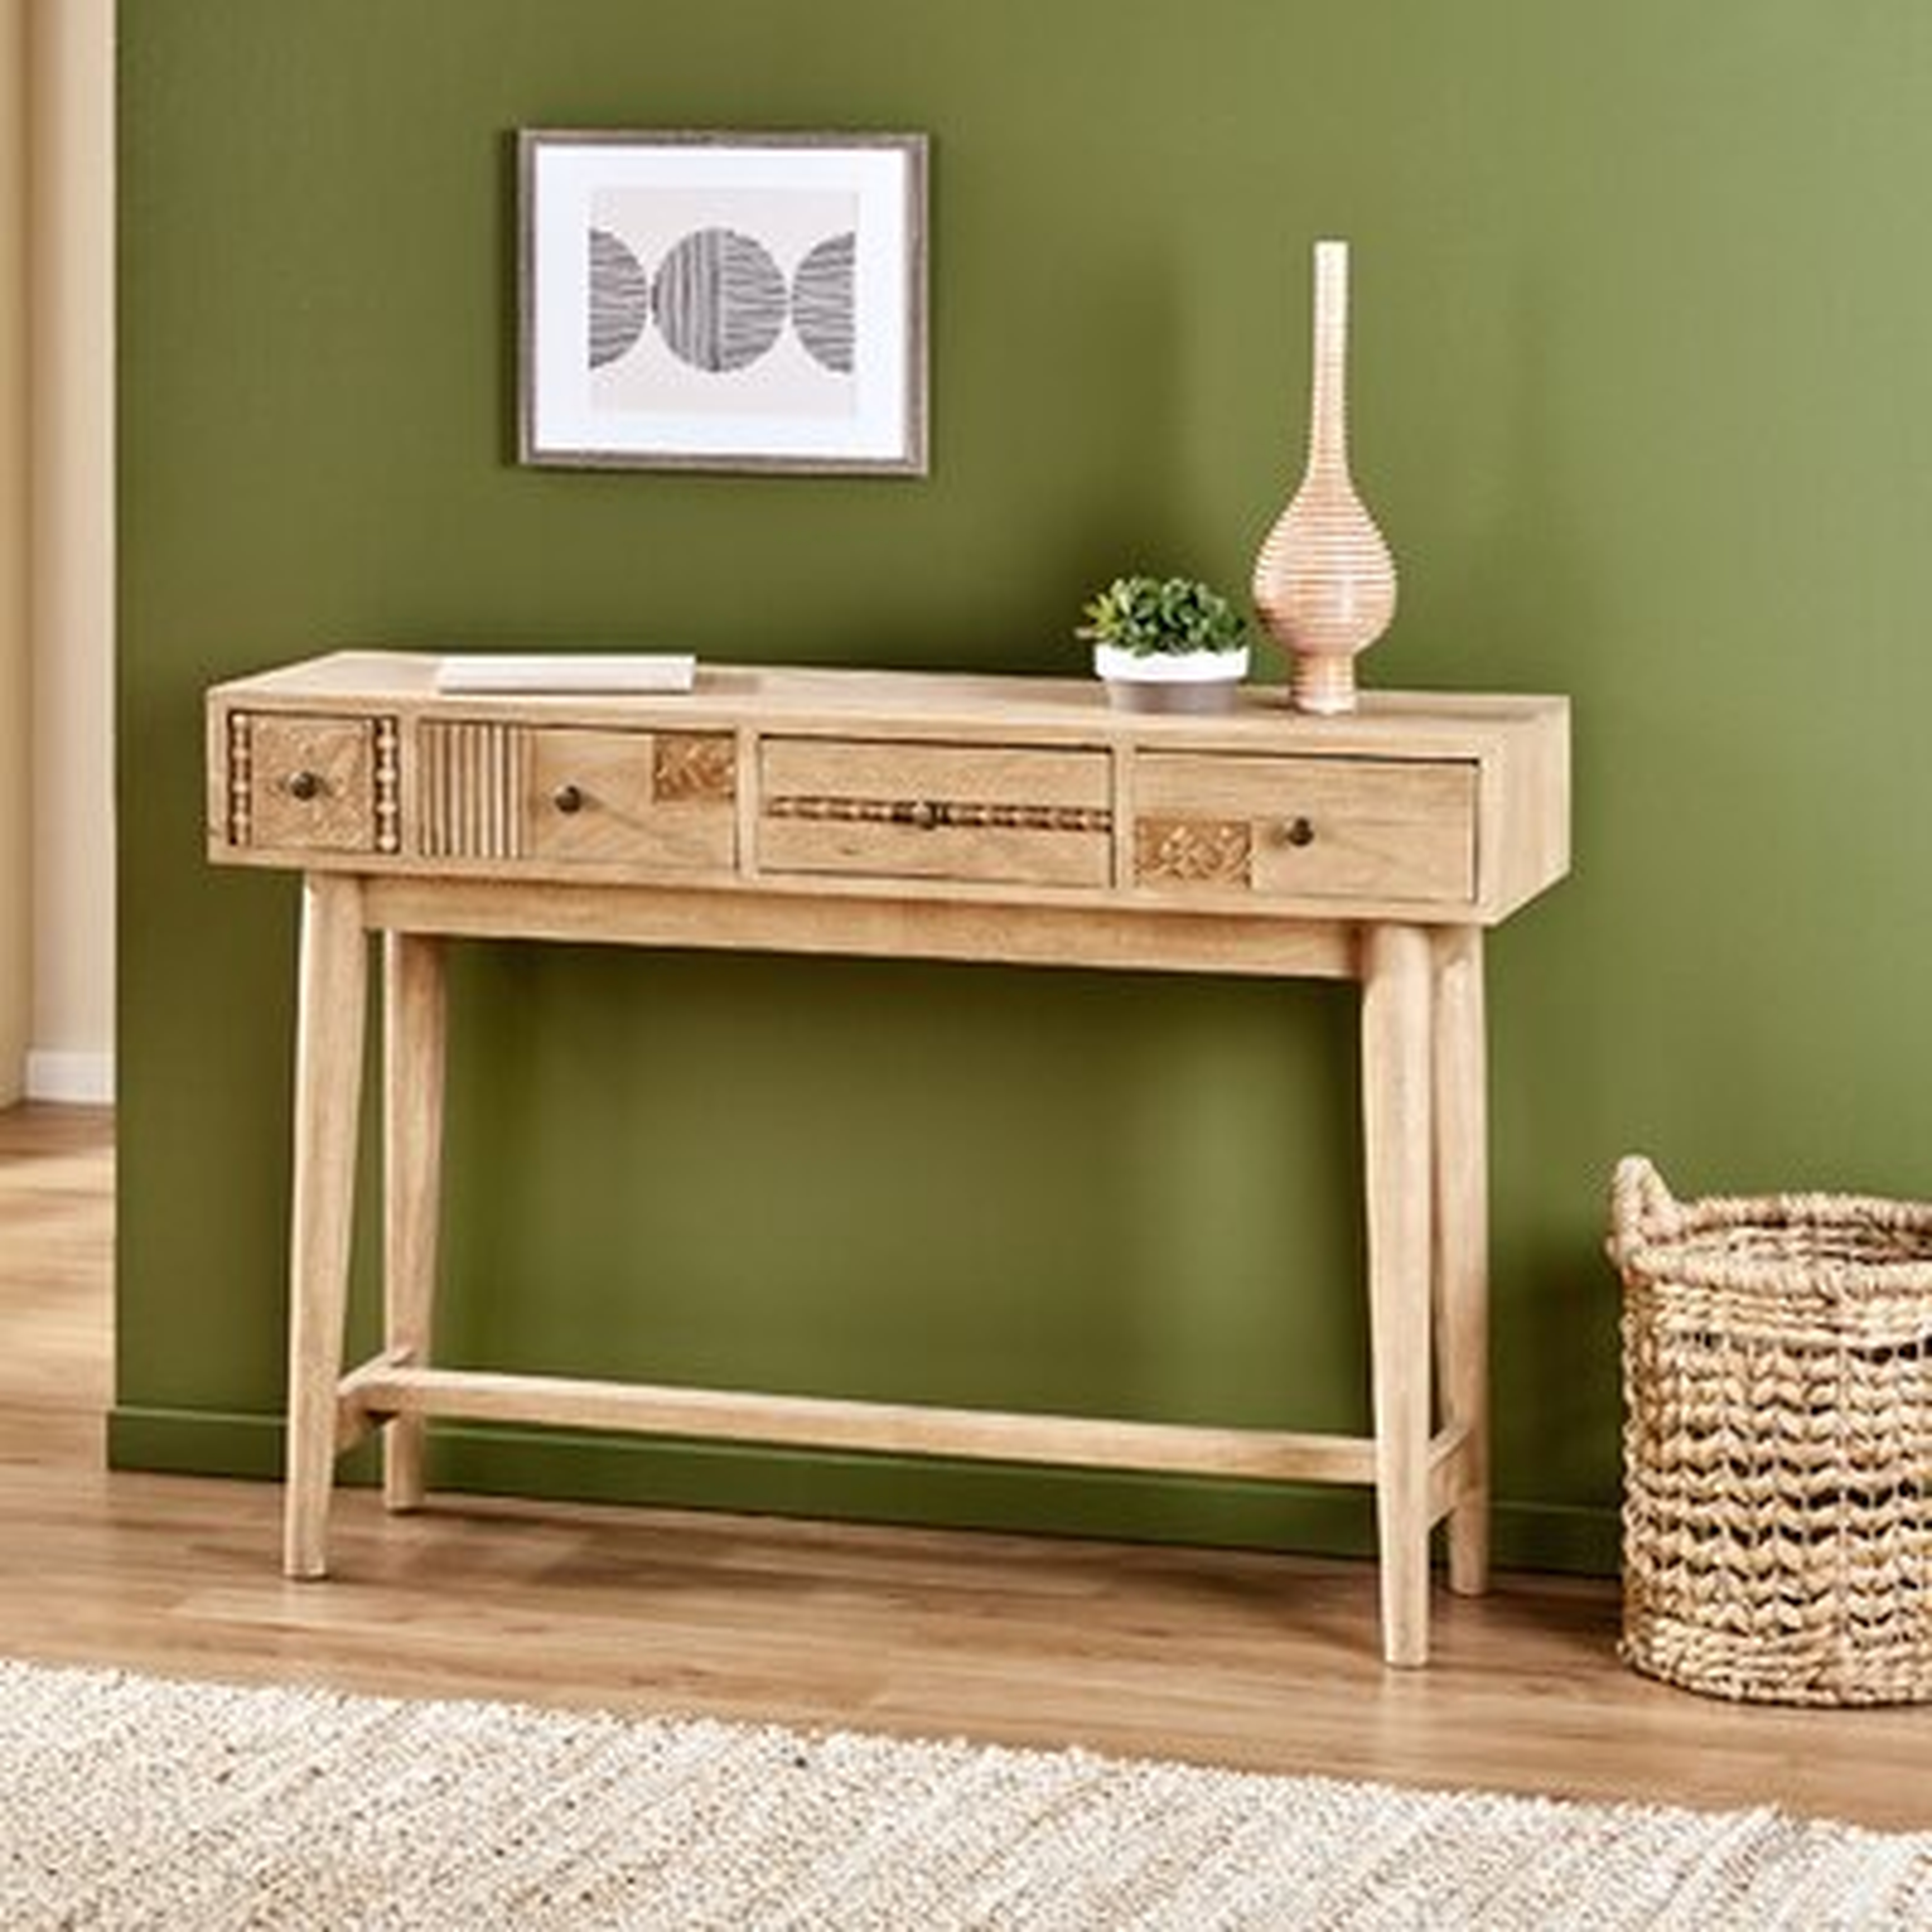 44" Solid Wood Console Table - Wayfair